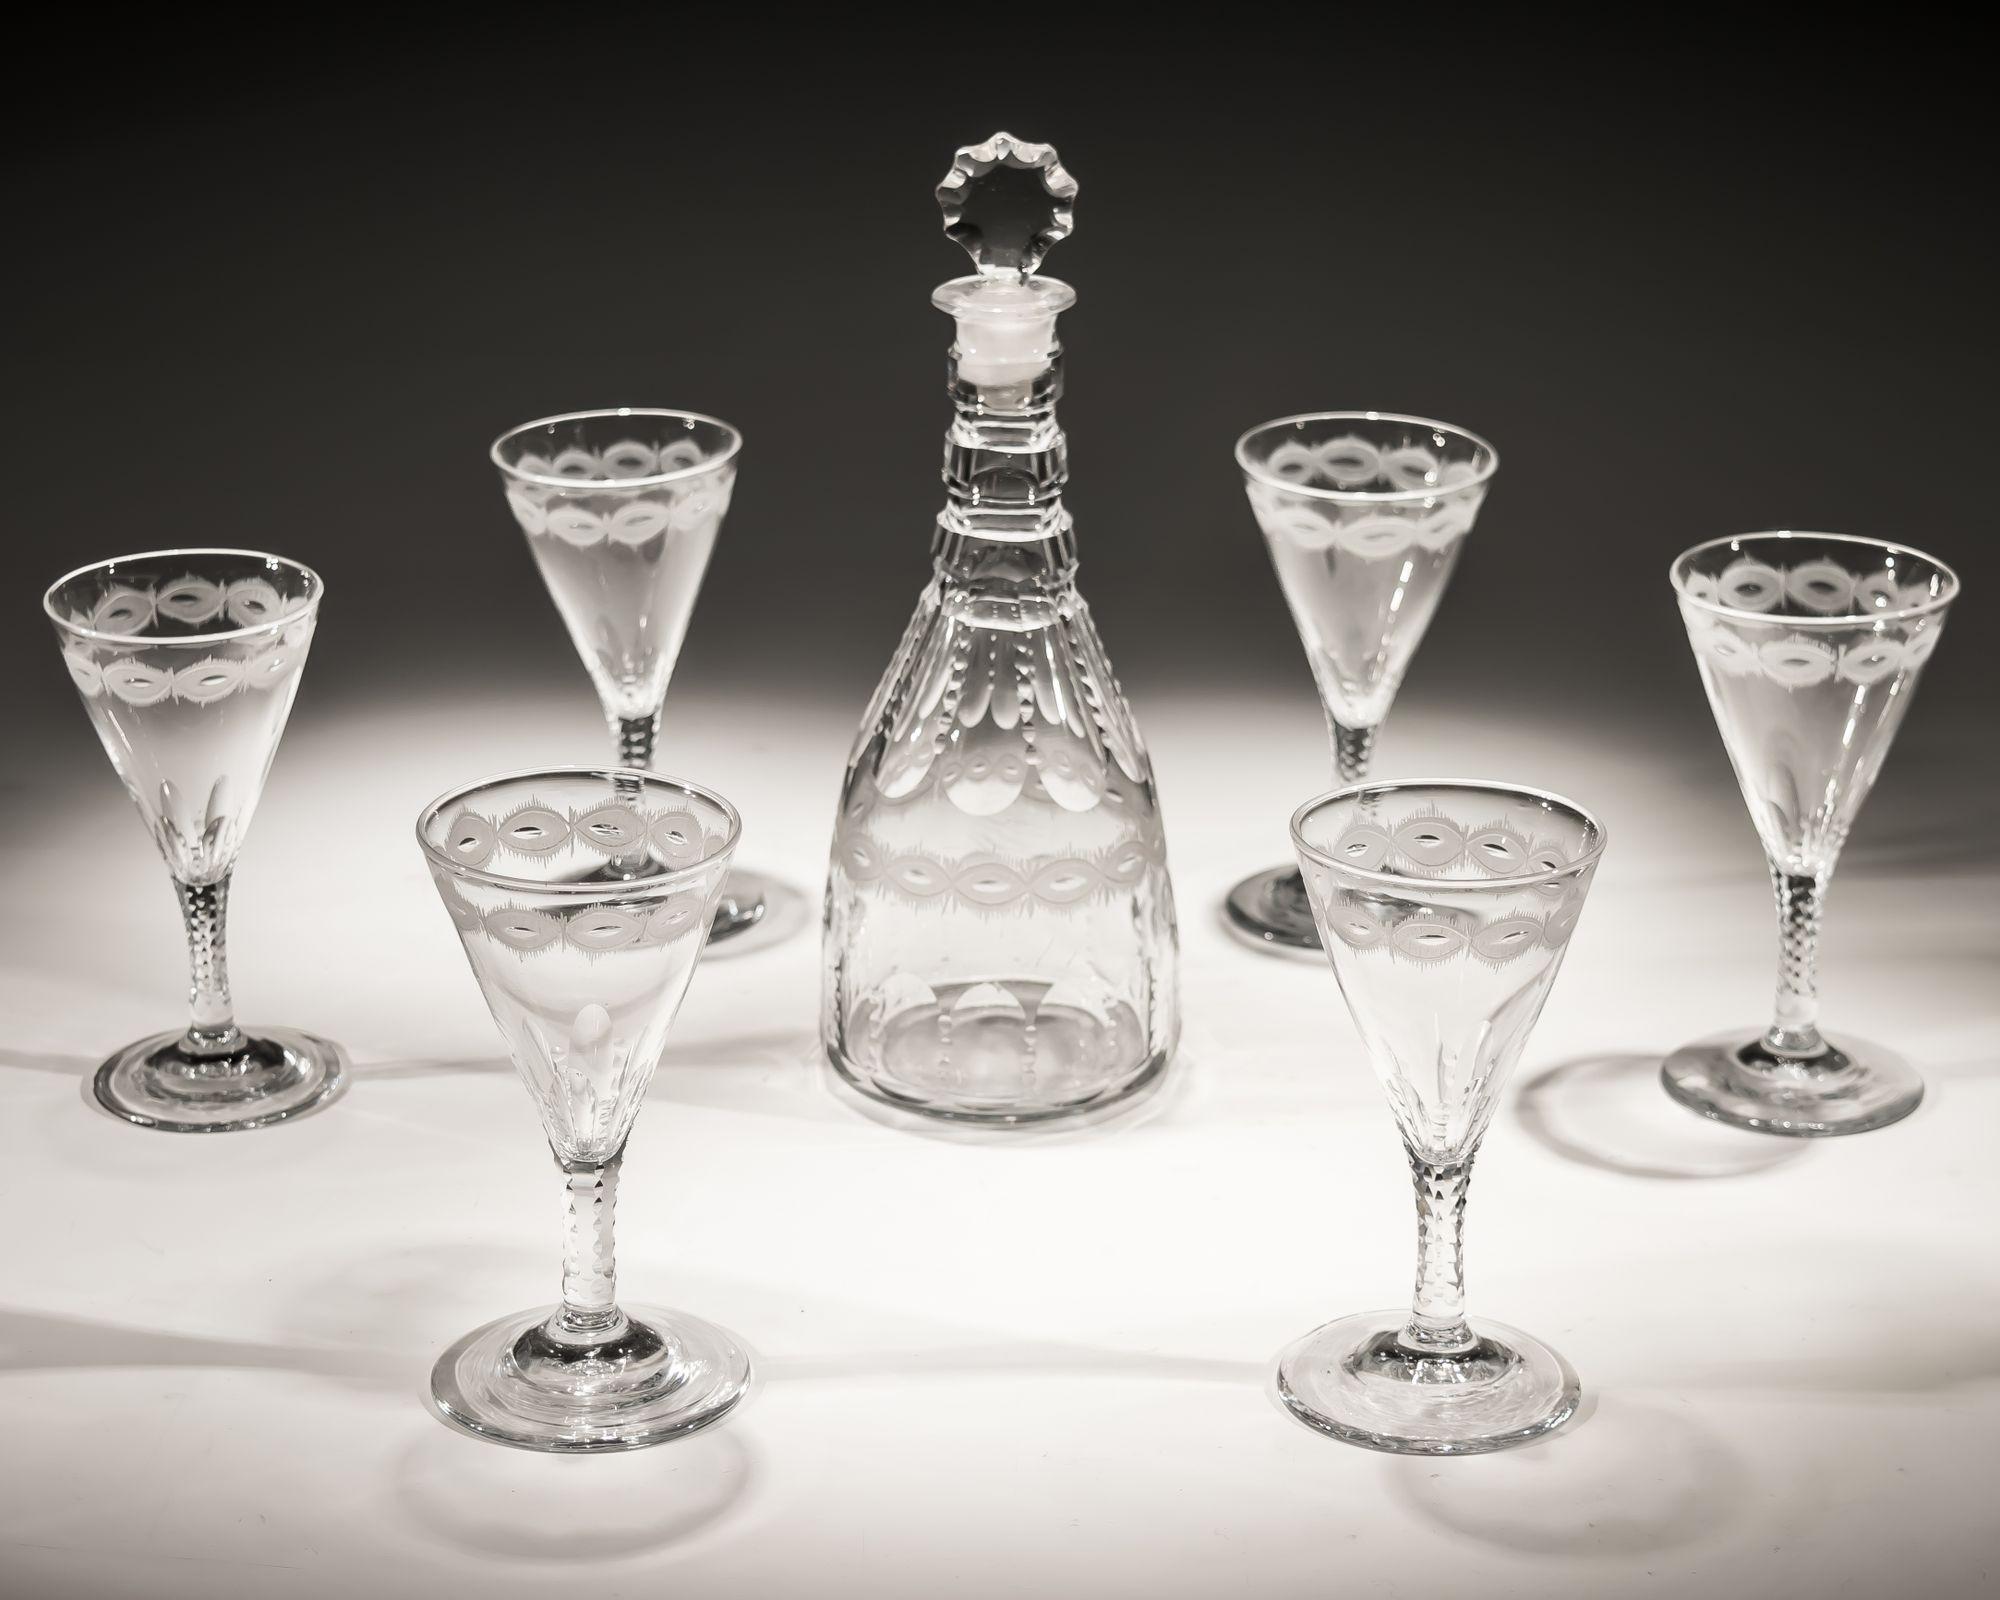 A slice and notch cut spirit decanter with engraved band with six corresponding glasses.

GLASSES

HEIGHT 13cm (5 1/4